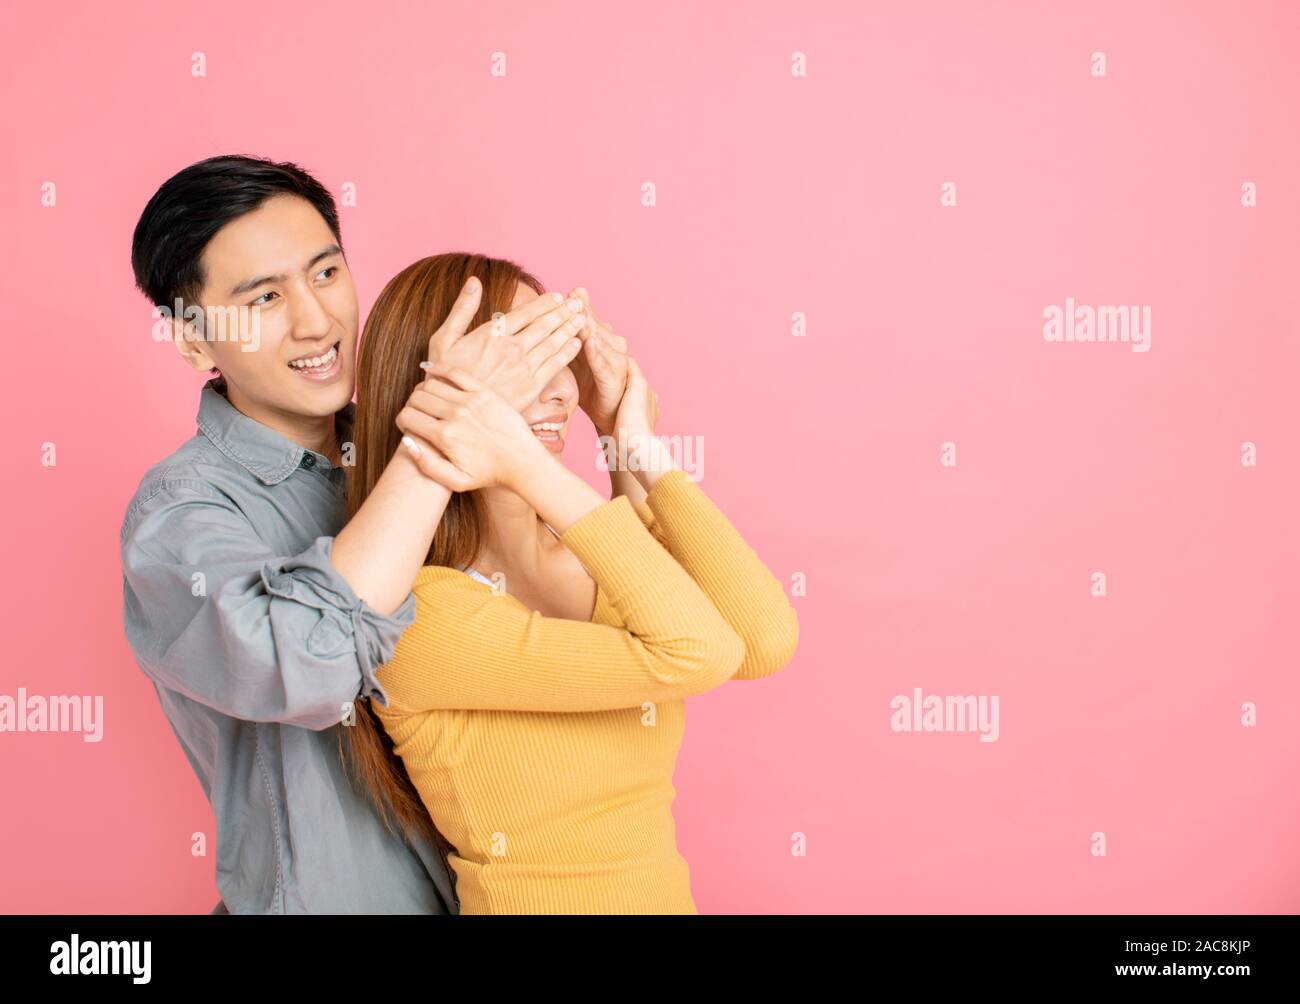 young man covering girl's eyes to surprise her Stock Photo